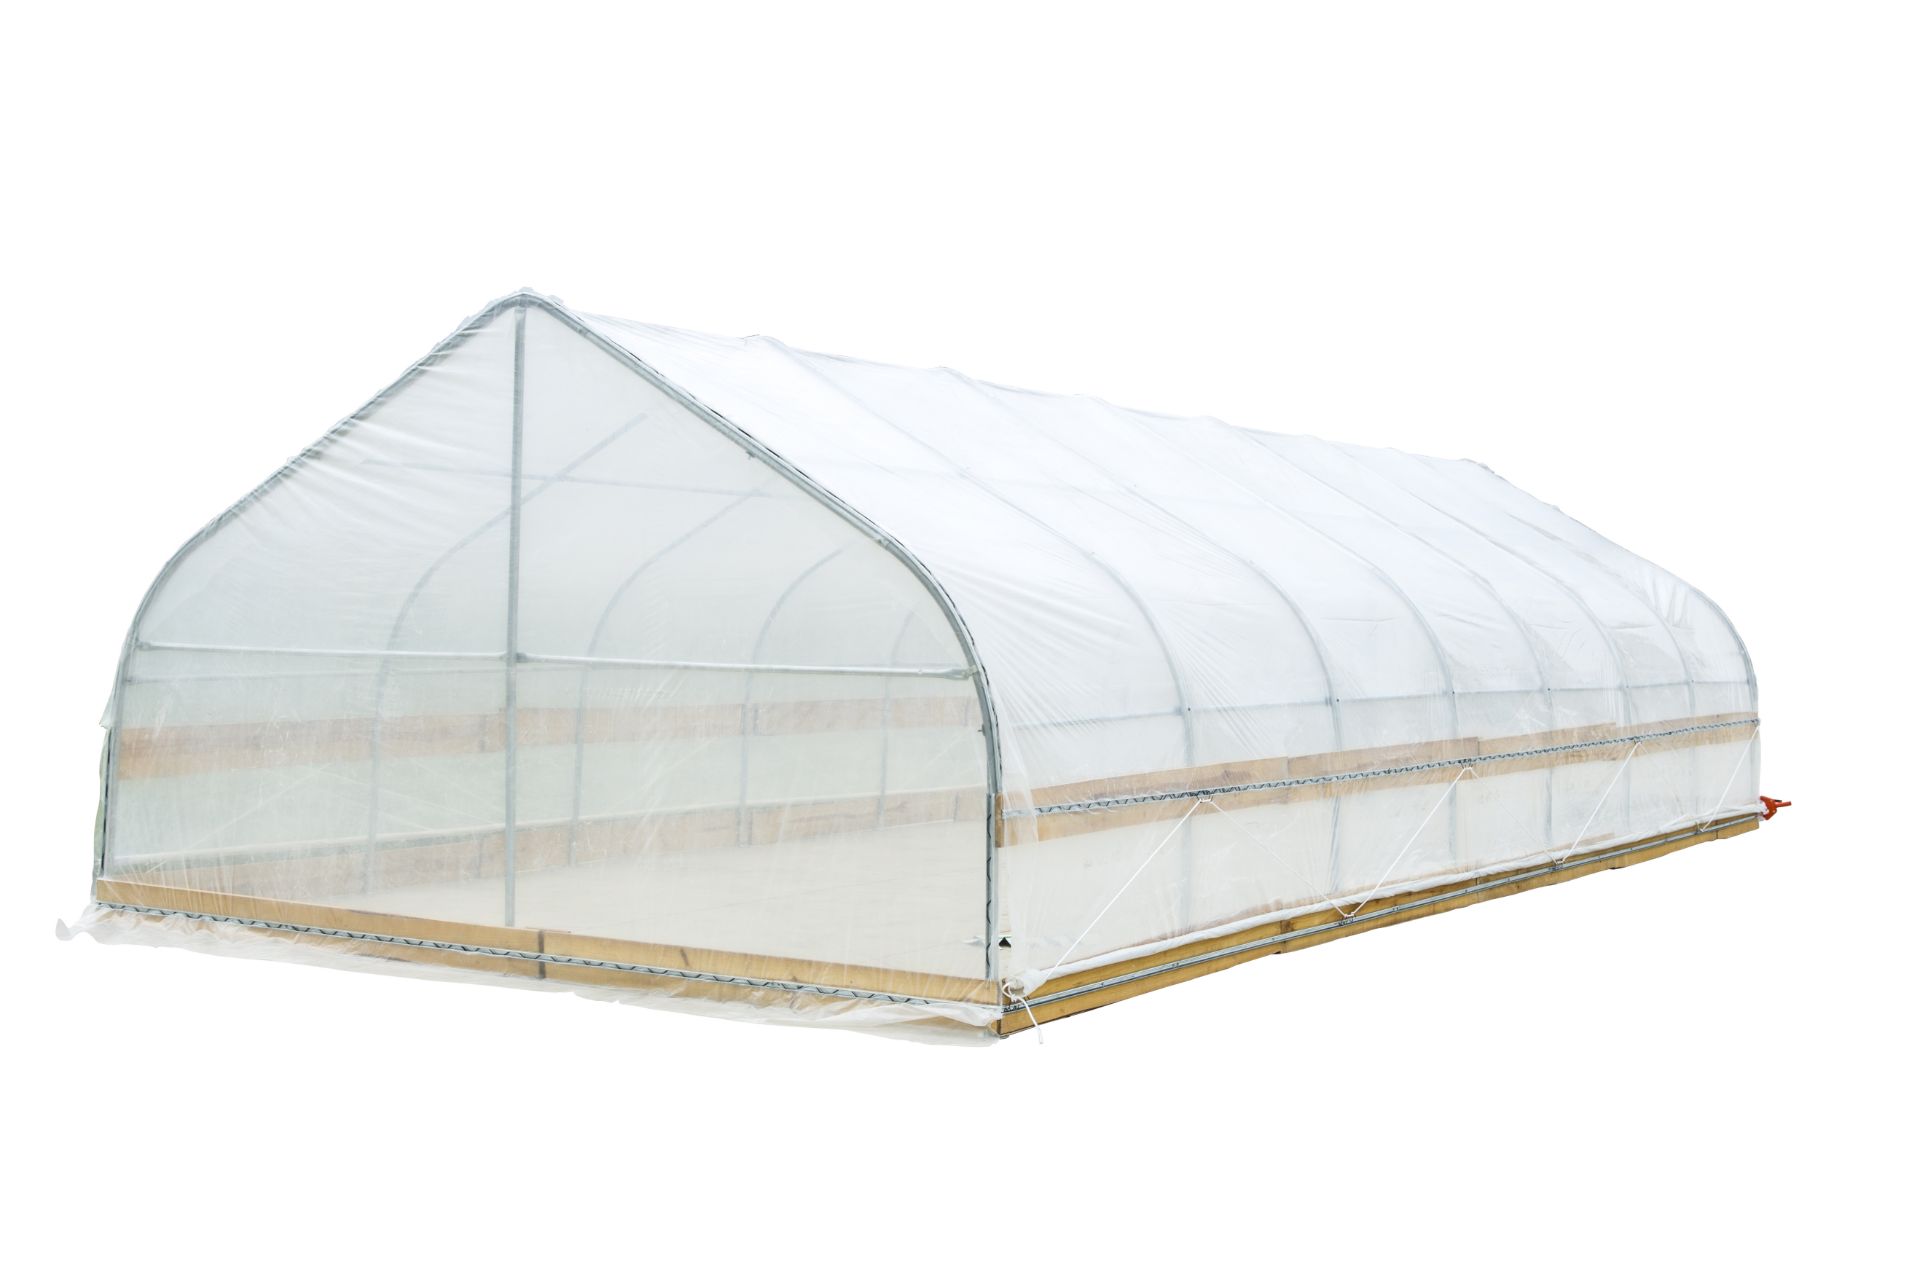 TMG-GH1230 GREENHOUSE 1230 CLEAR EVA 6 MIL - Image 3 of 5